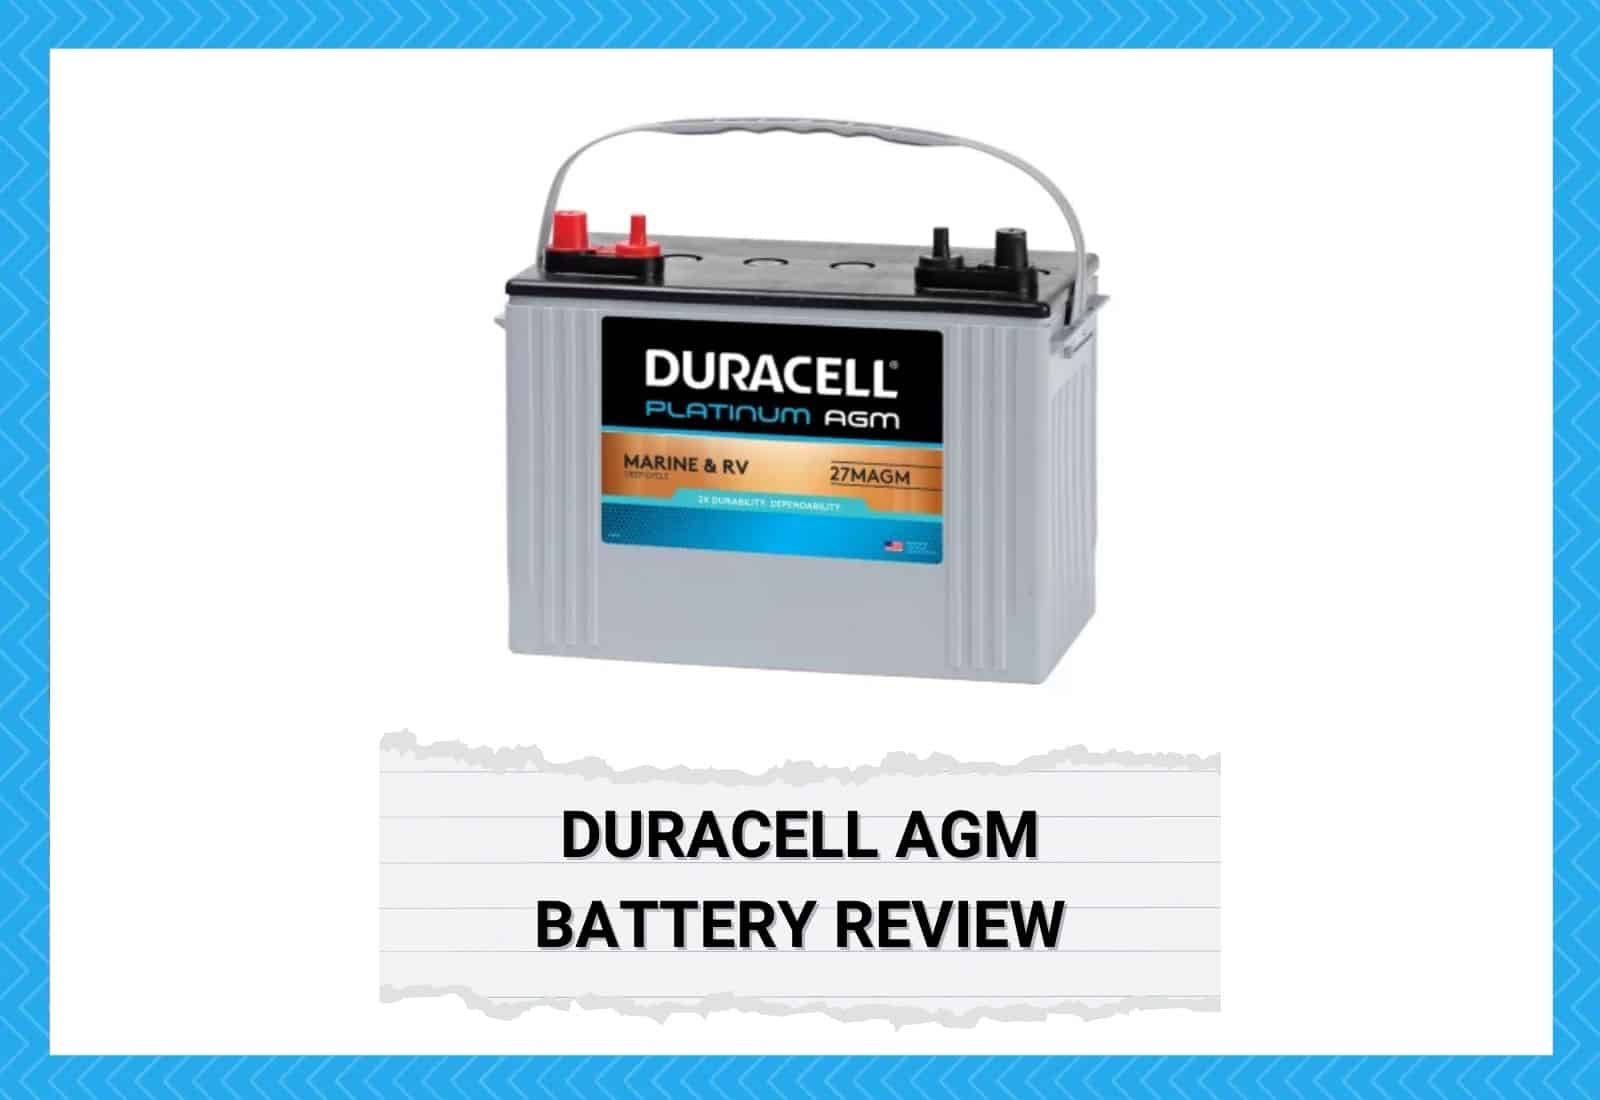 Duracell AGM Battery Review